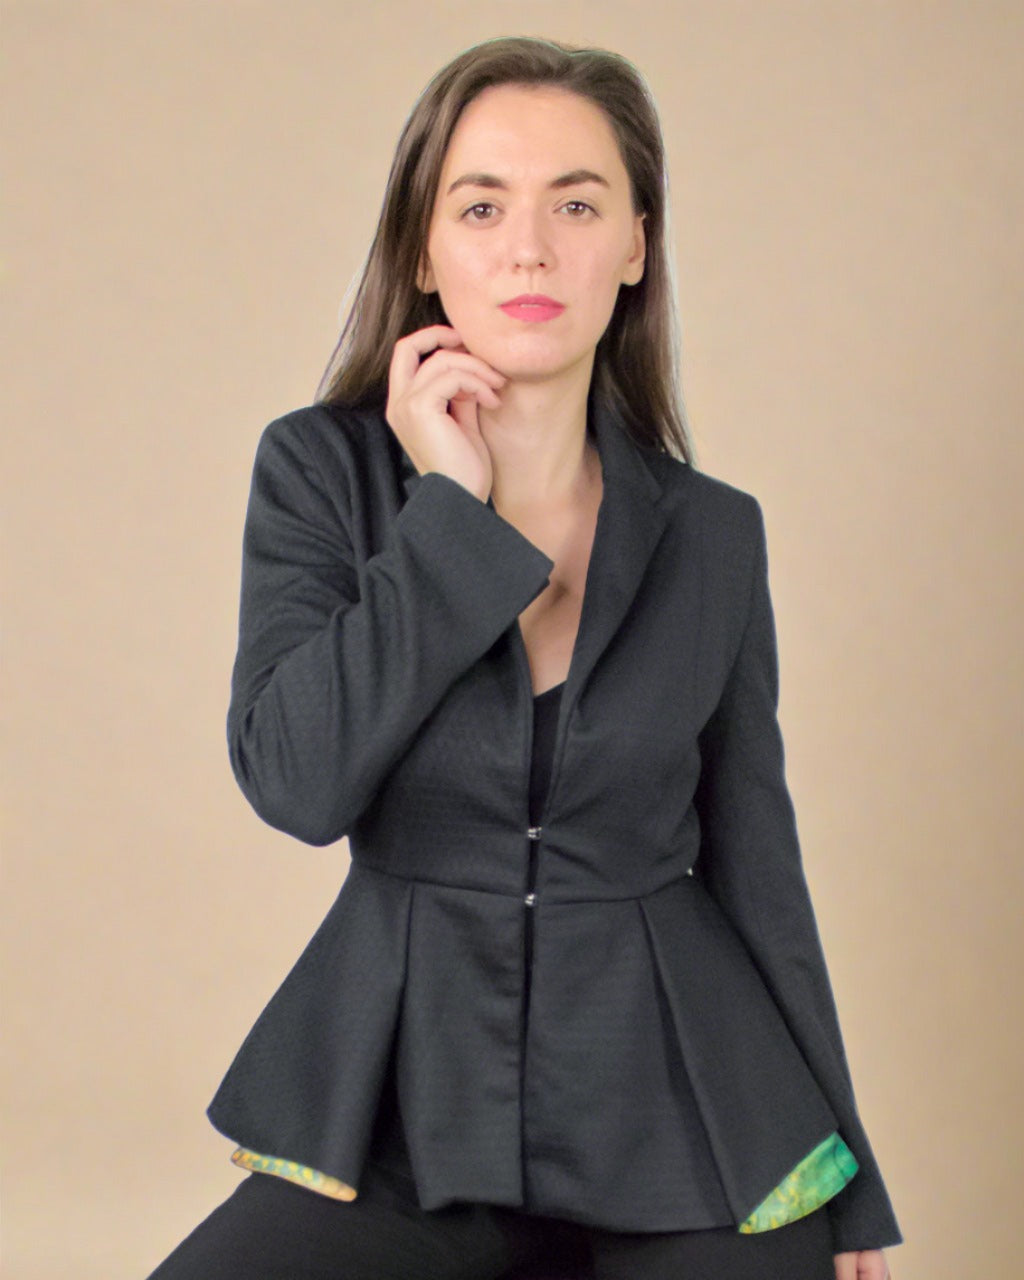 Fitted tailored women's designer black blazer sustainable ethical jacket for office work ADKN made from recycled PET bottles